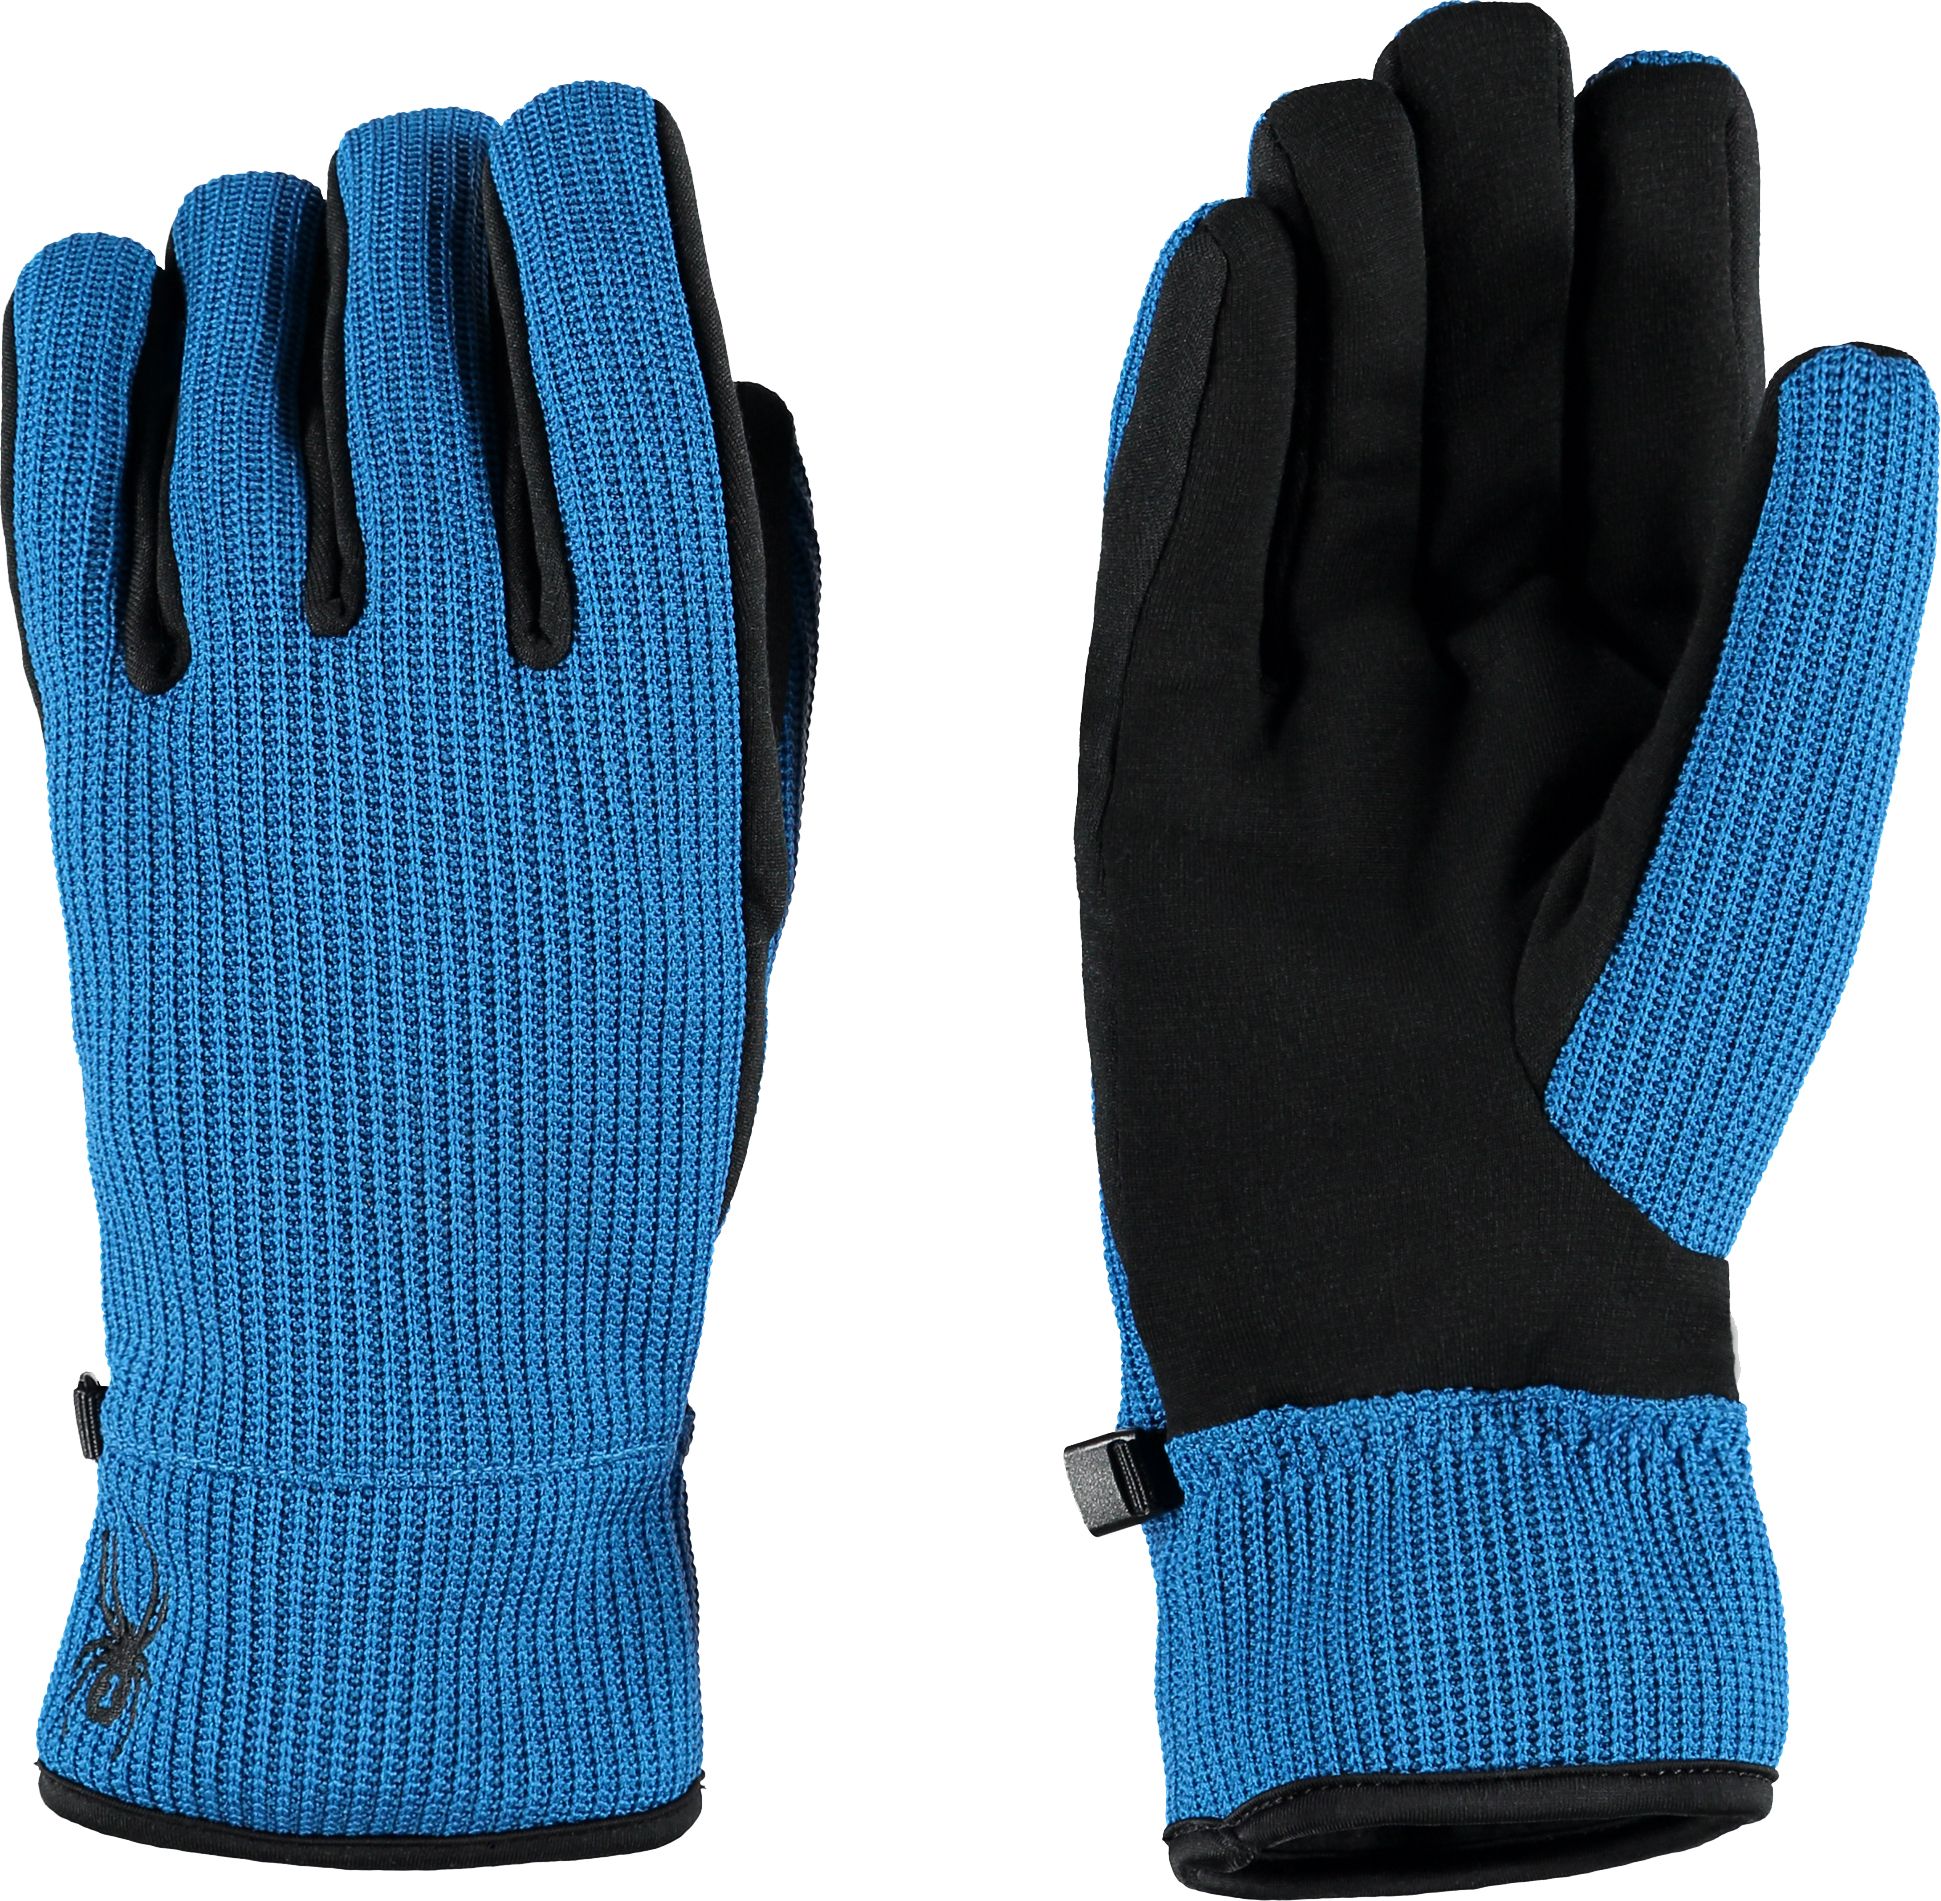 Details about   SPYDER Core Conduct Touchscreen Gloves XL